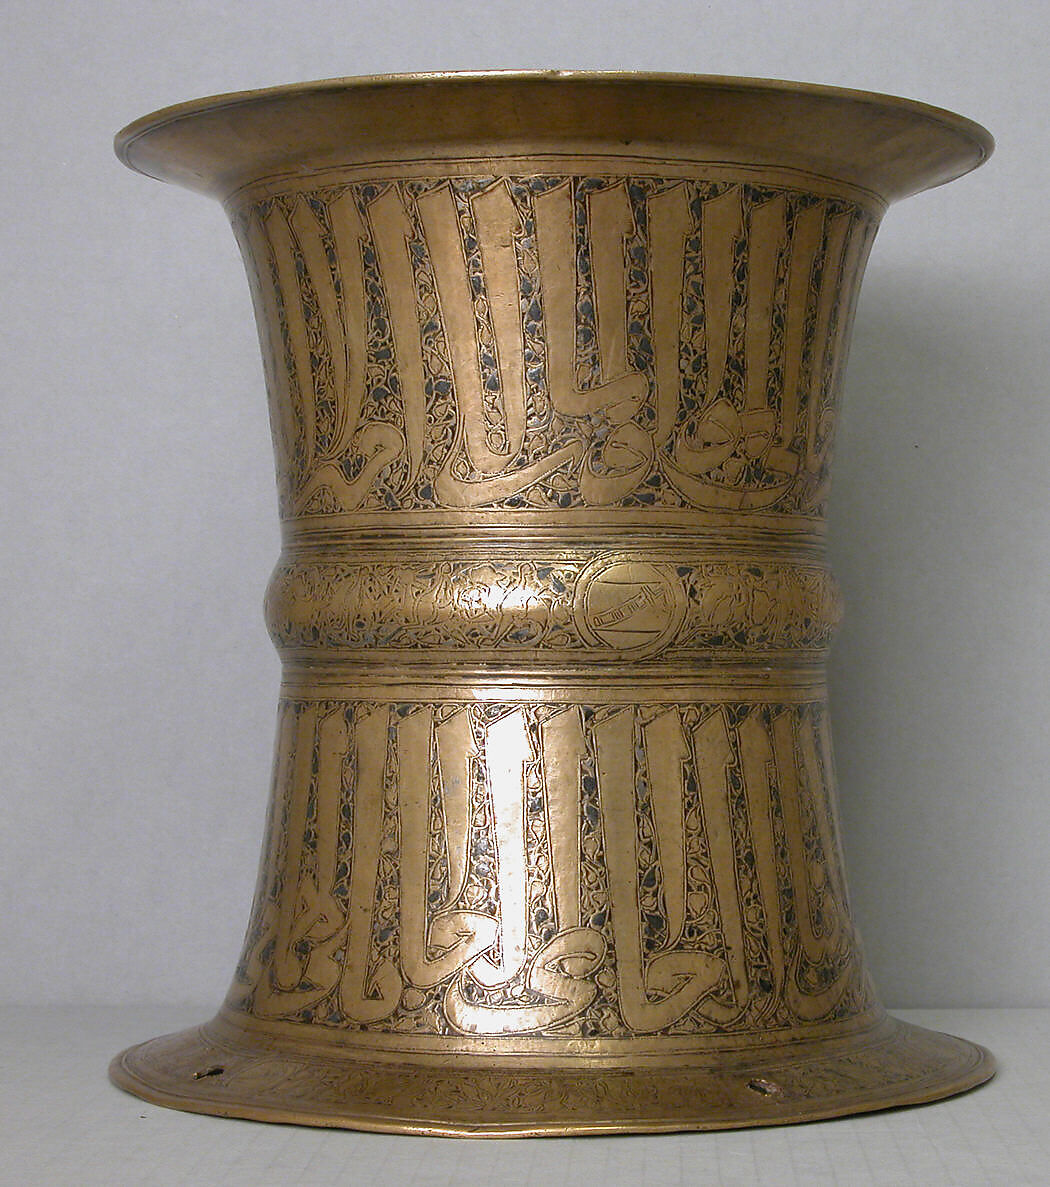 Stand, Brass; inlaid with silver 